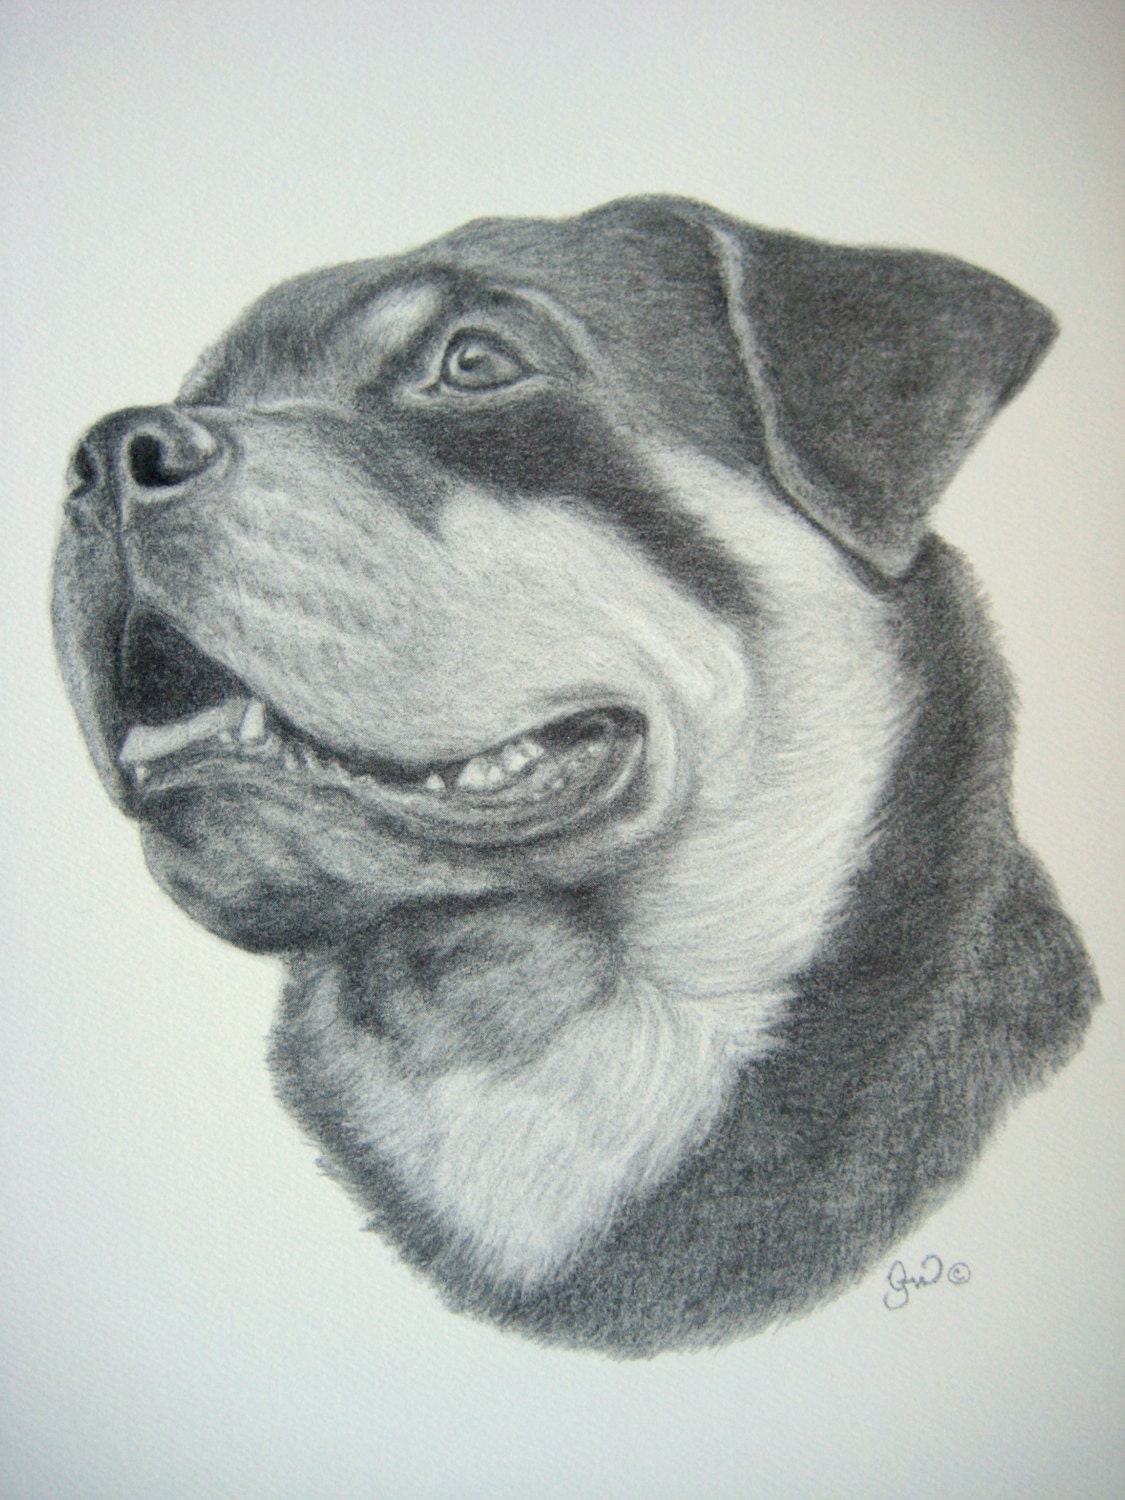 Rottweiler Rottie Dog Art Print from Original Charcoal Drawing